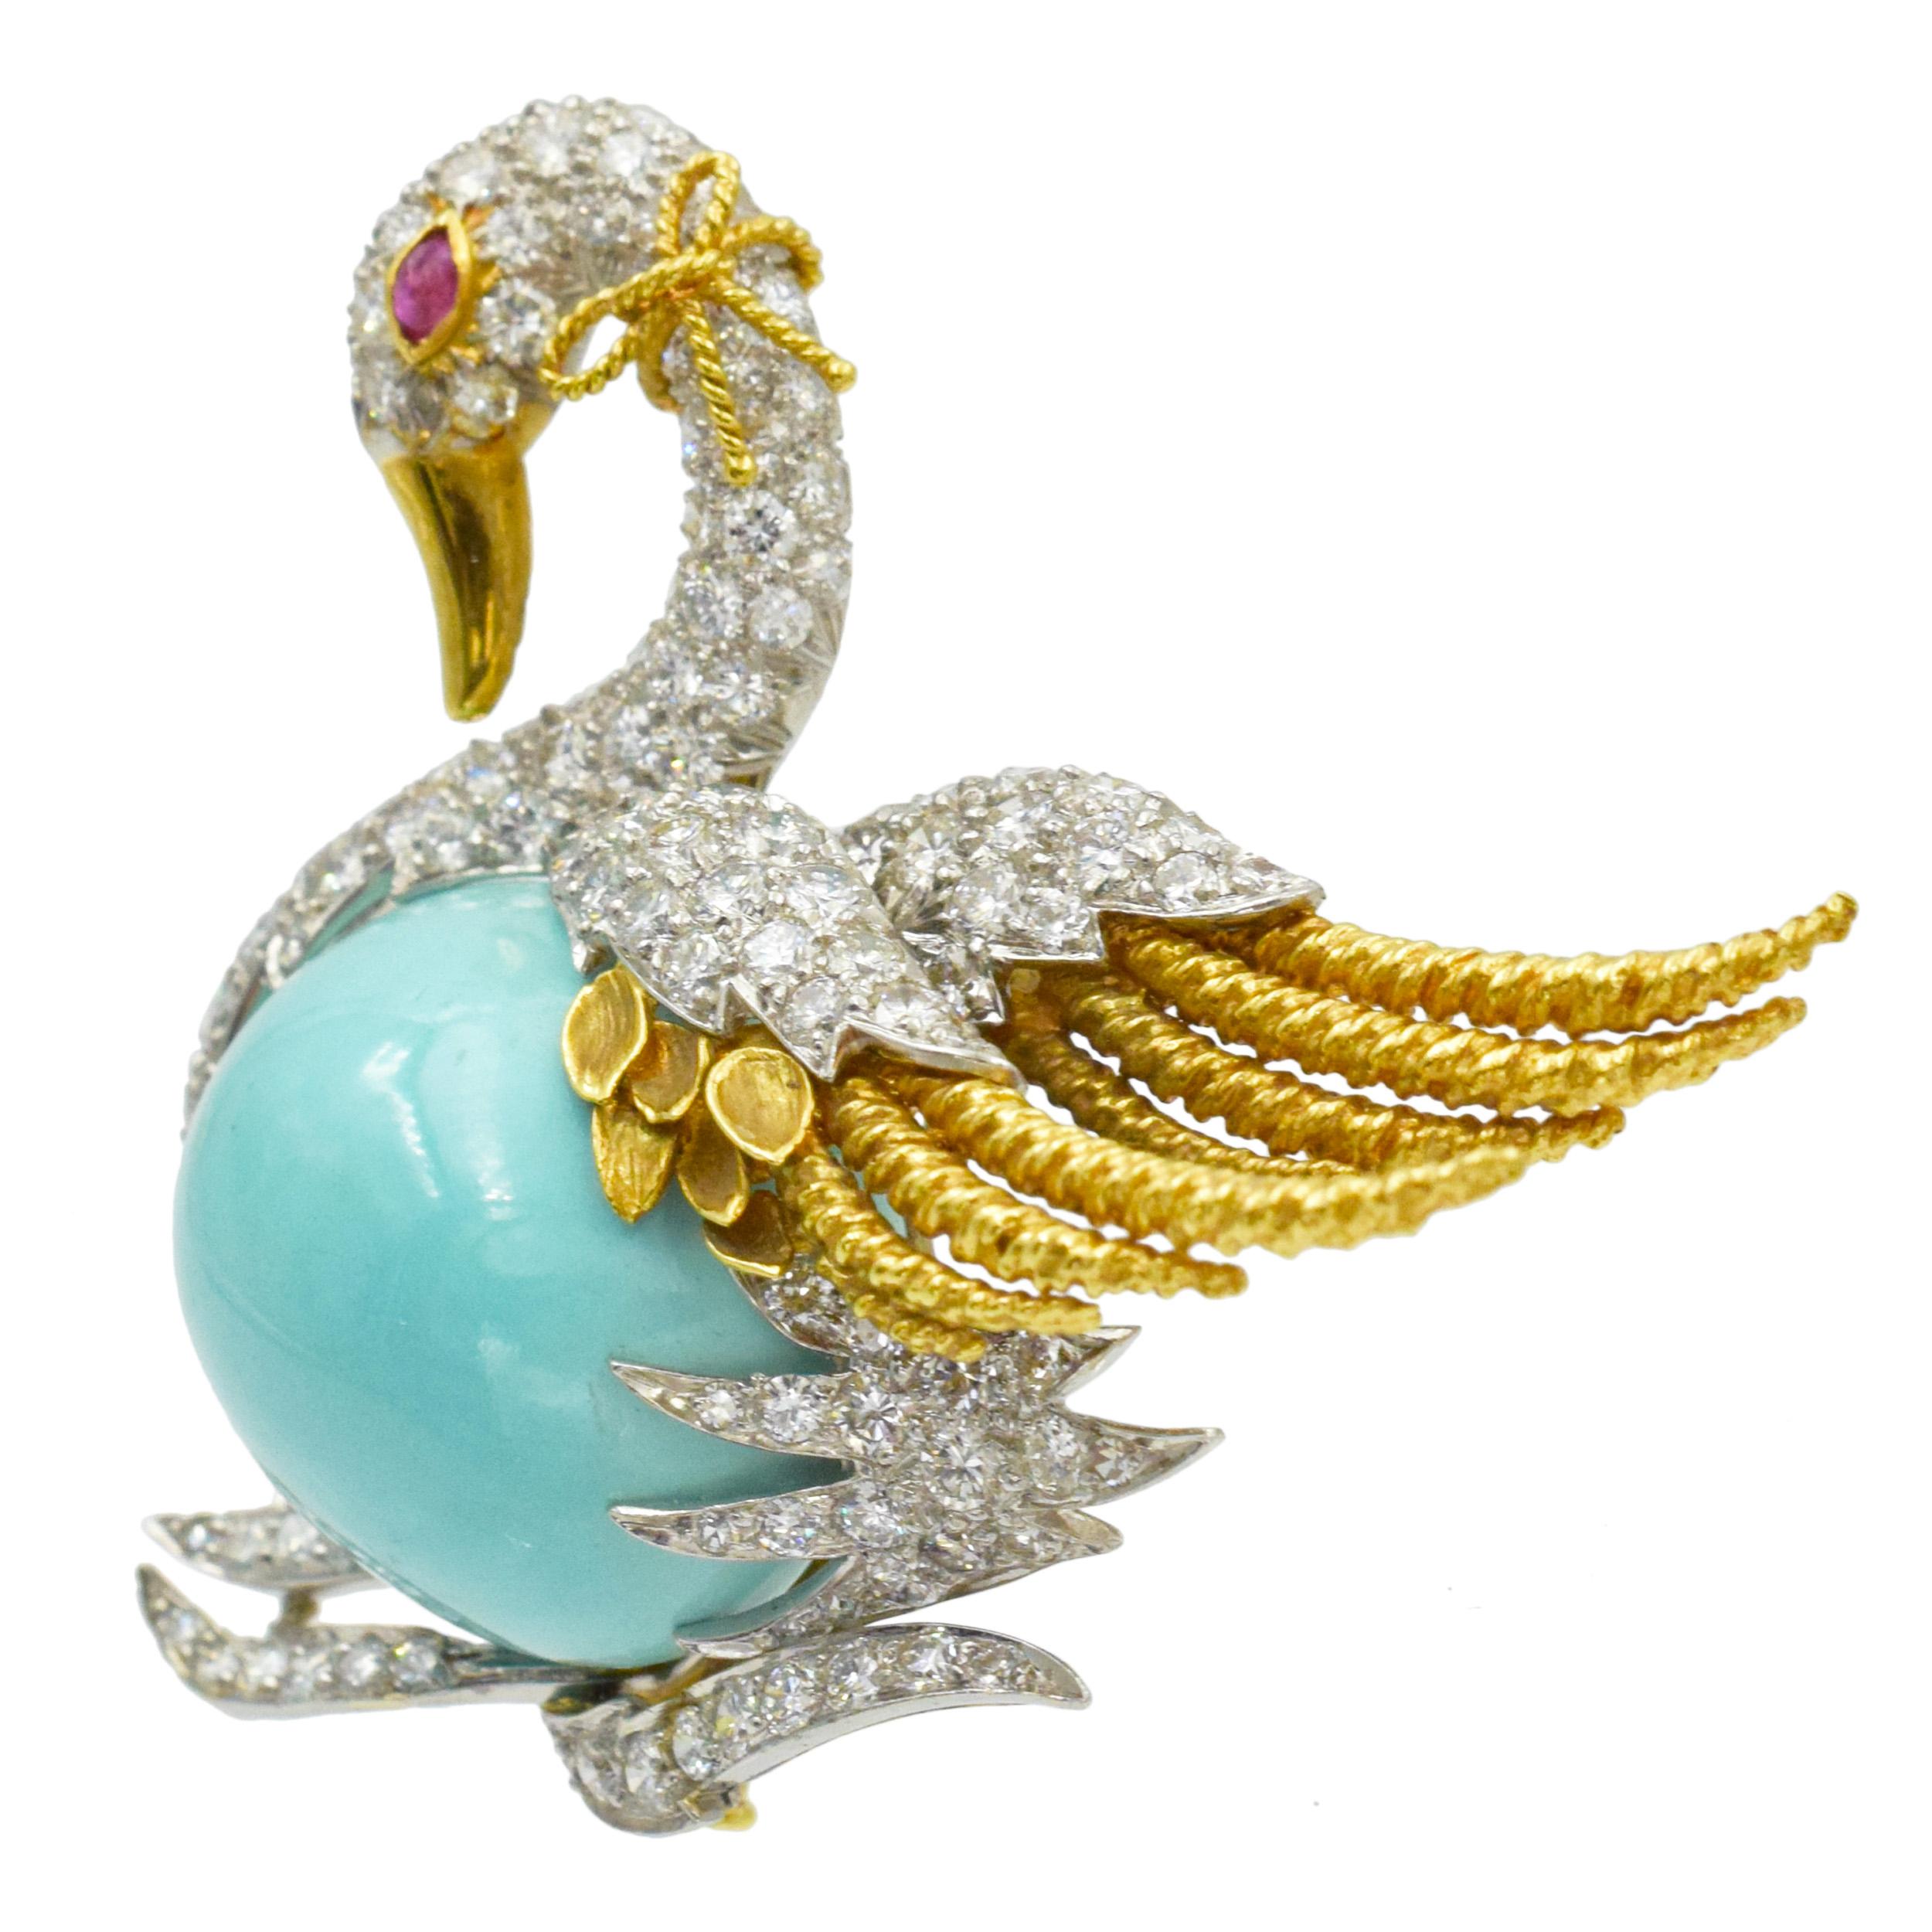 Webb Turquoise, diamond and ruby swan brooch in 18k yellow gold and platinum 
The brooch features a swan set with cabochon cut turquoise body, and round brilliant cut diamonds. Accented with marquise shape ruby eye and yellow gold feathers, beak and